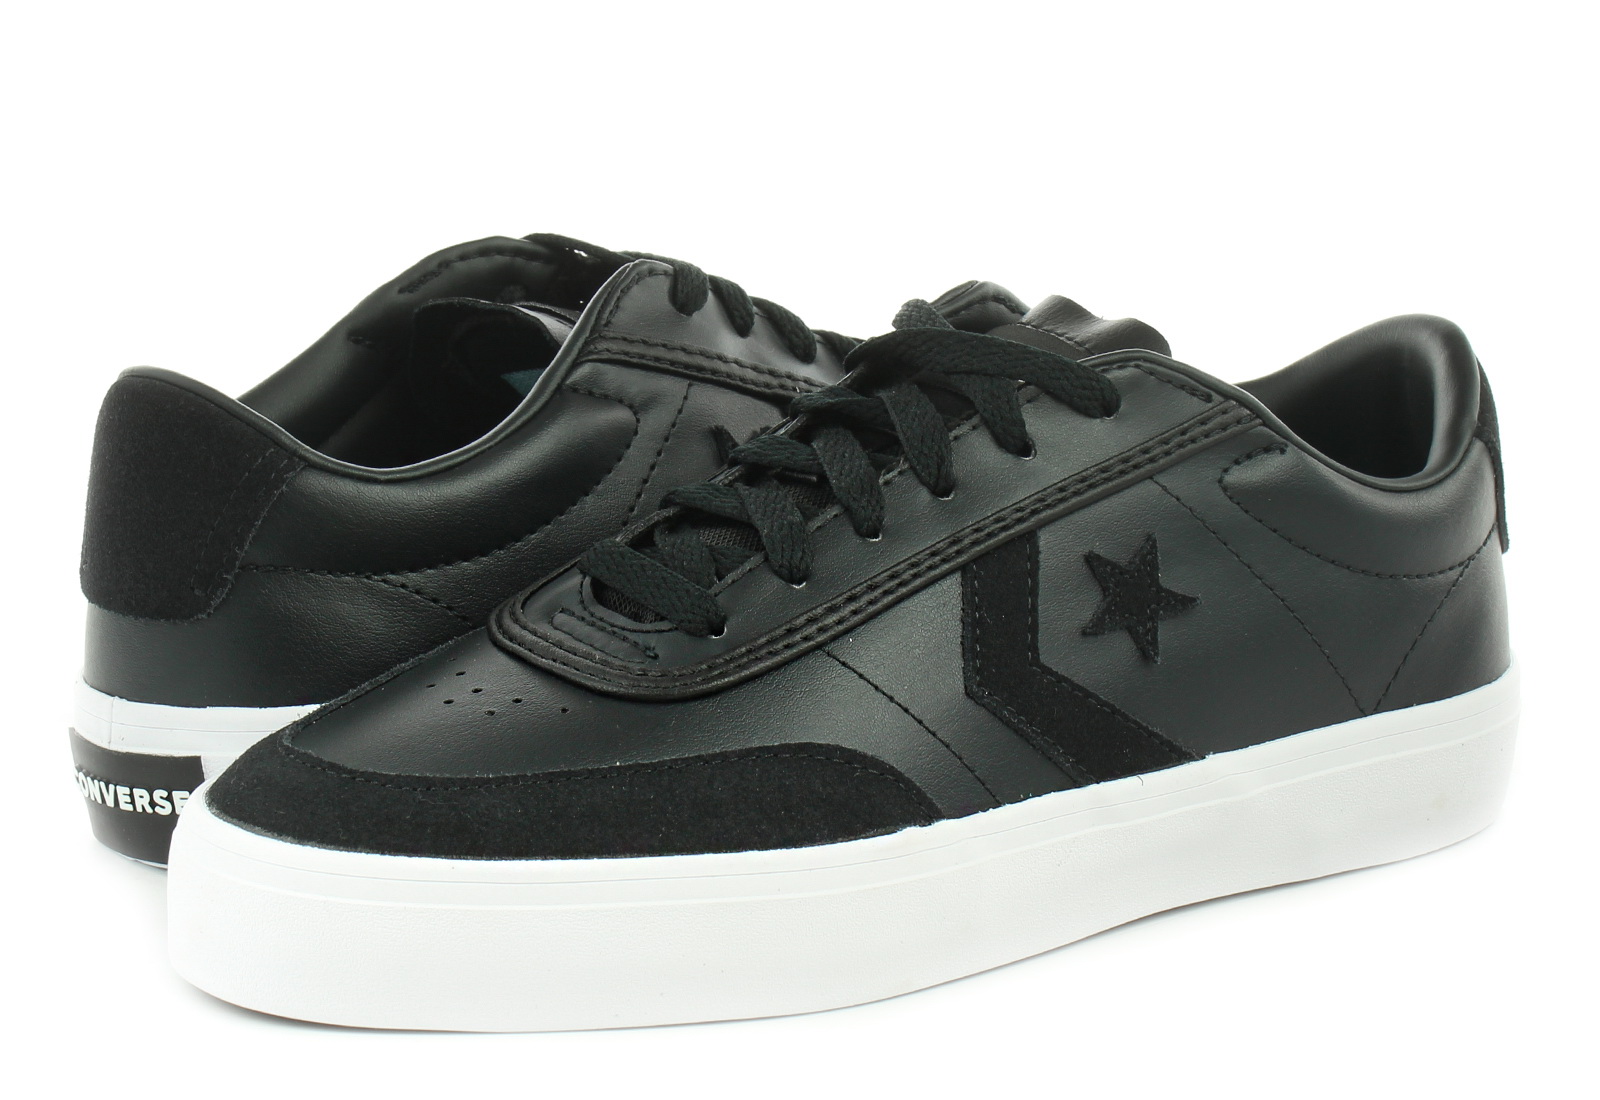 Converse Trainers - Courtland Ox 162580C - Online shop for shoes and boots